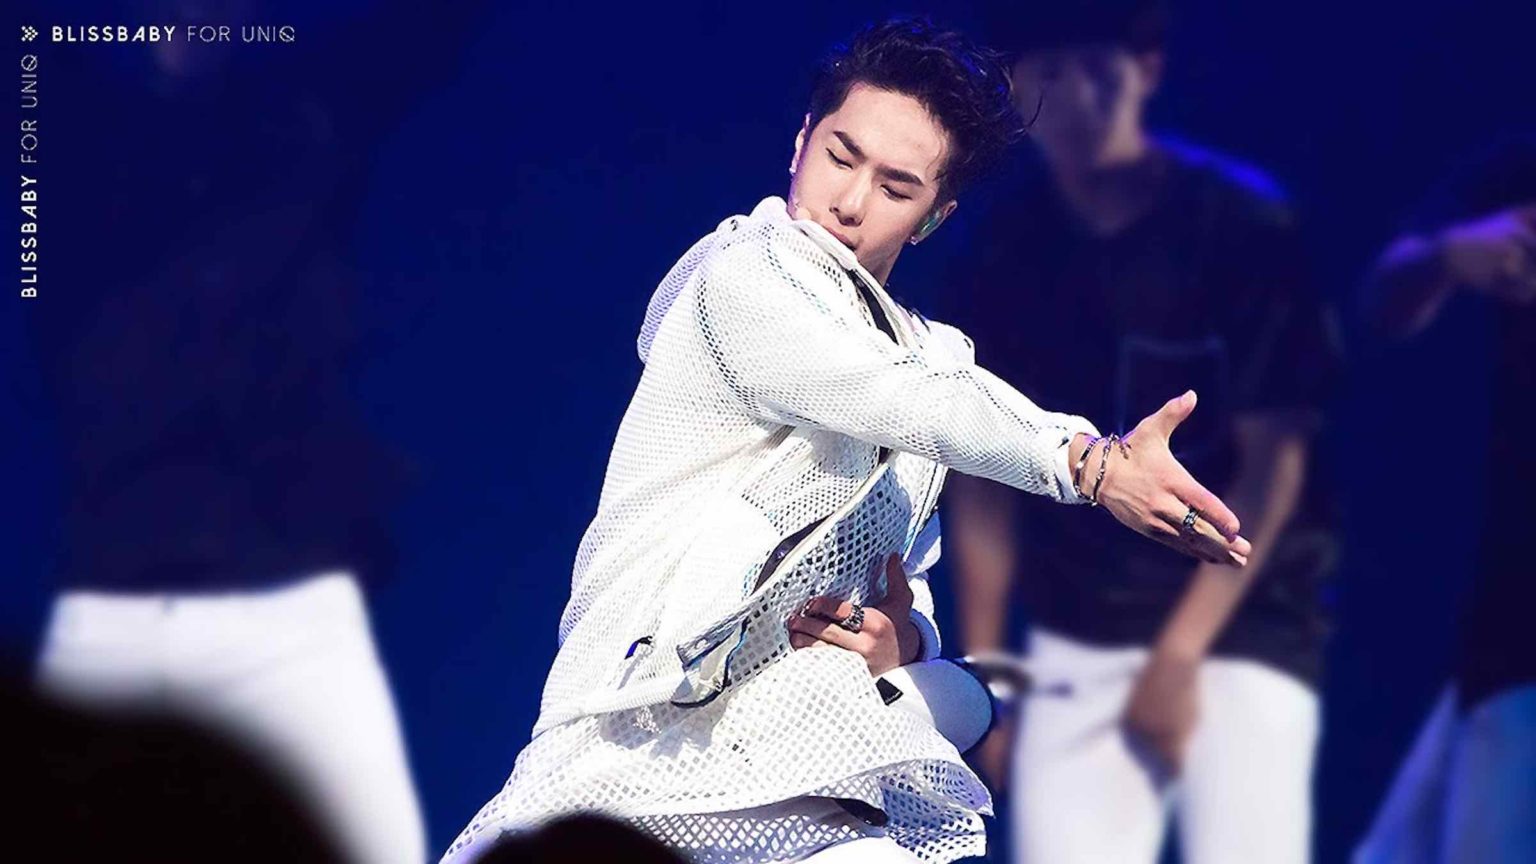 'The Untamed'’s breakout star Wang Yibo is, quite simply, a man of many talents. Here’s a comprehensive list of Yibo’s best dance performances ever.